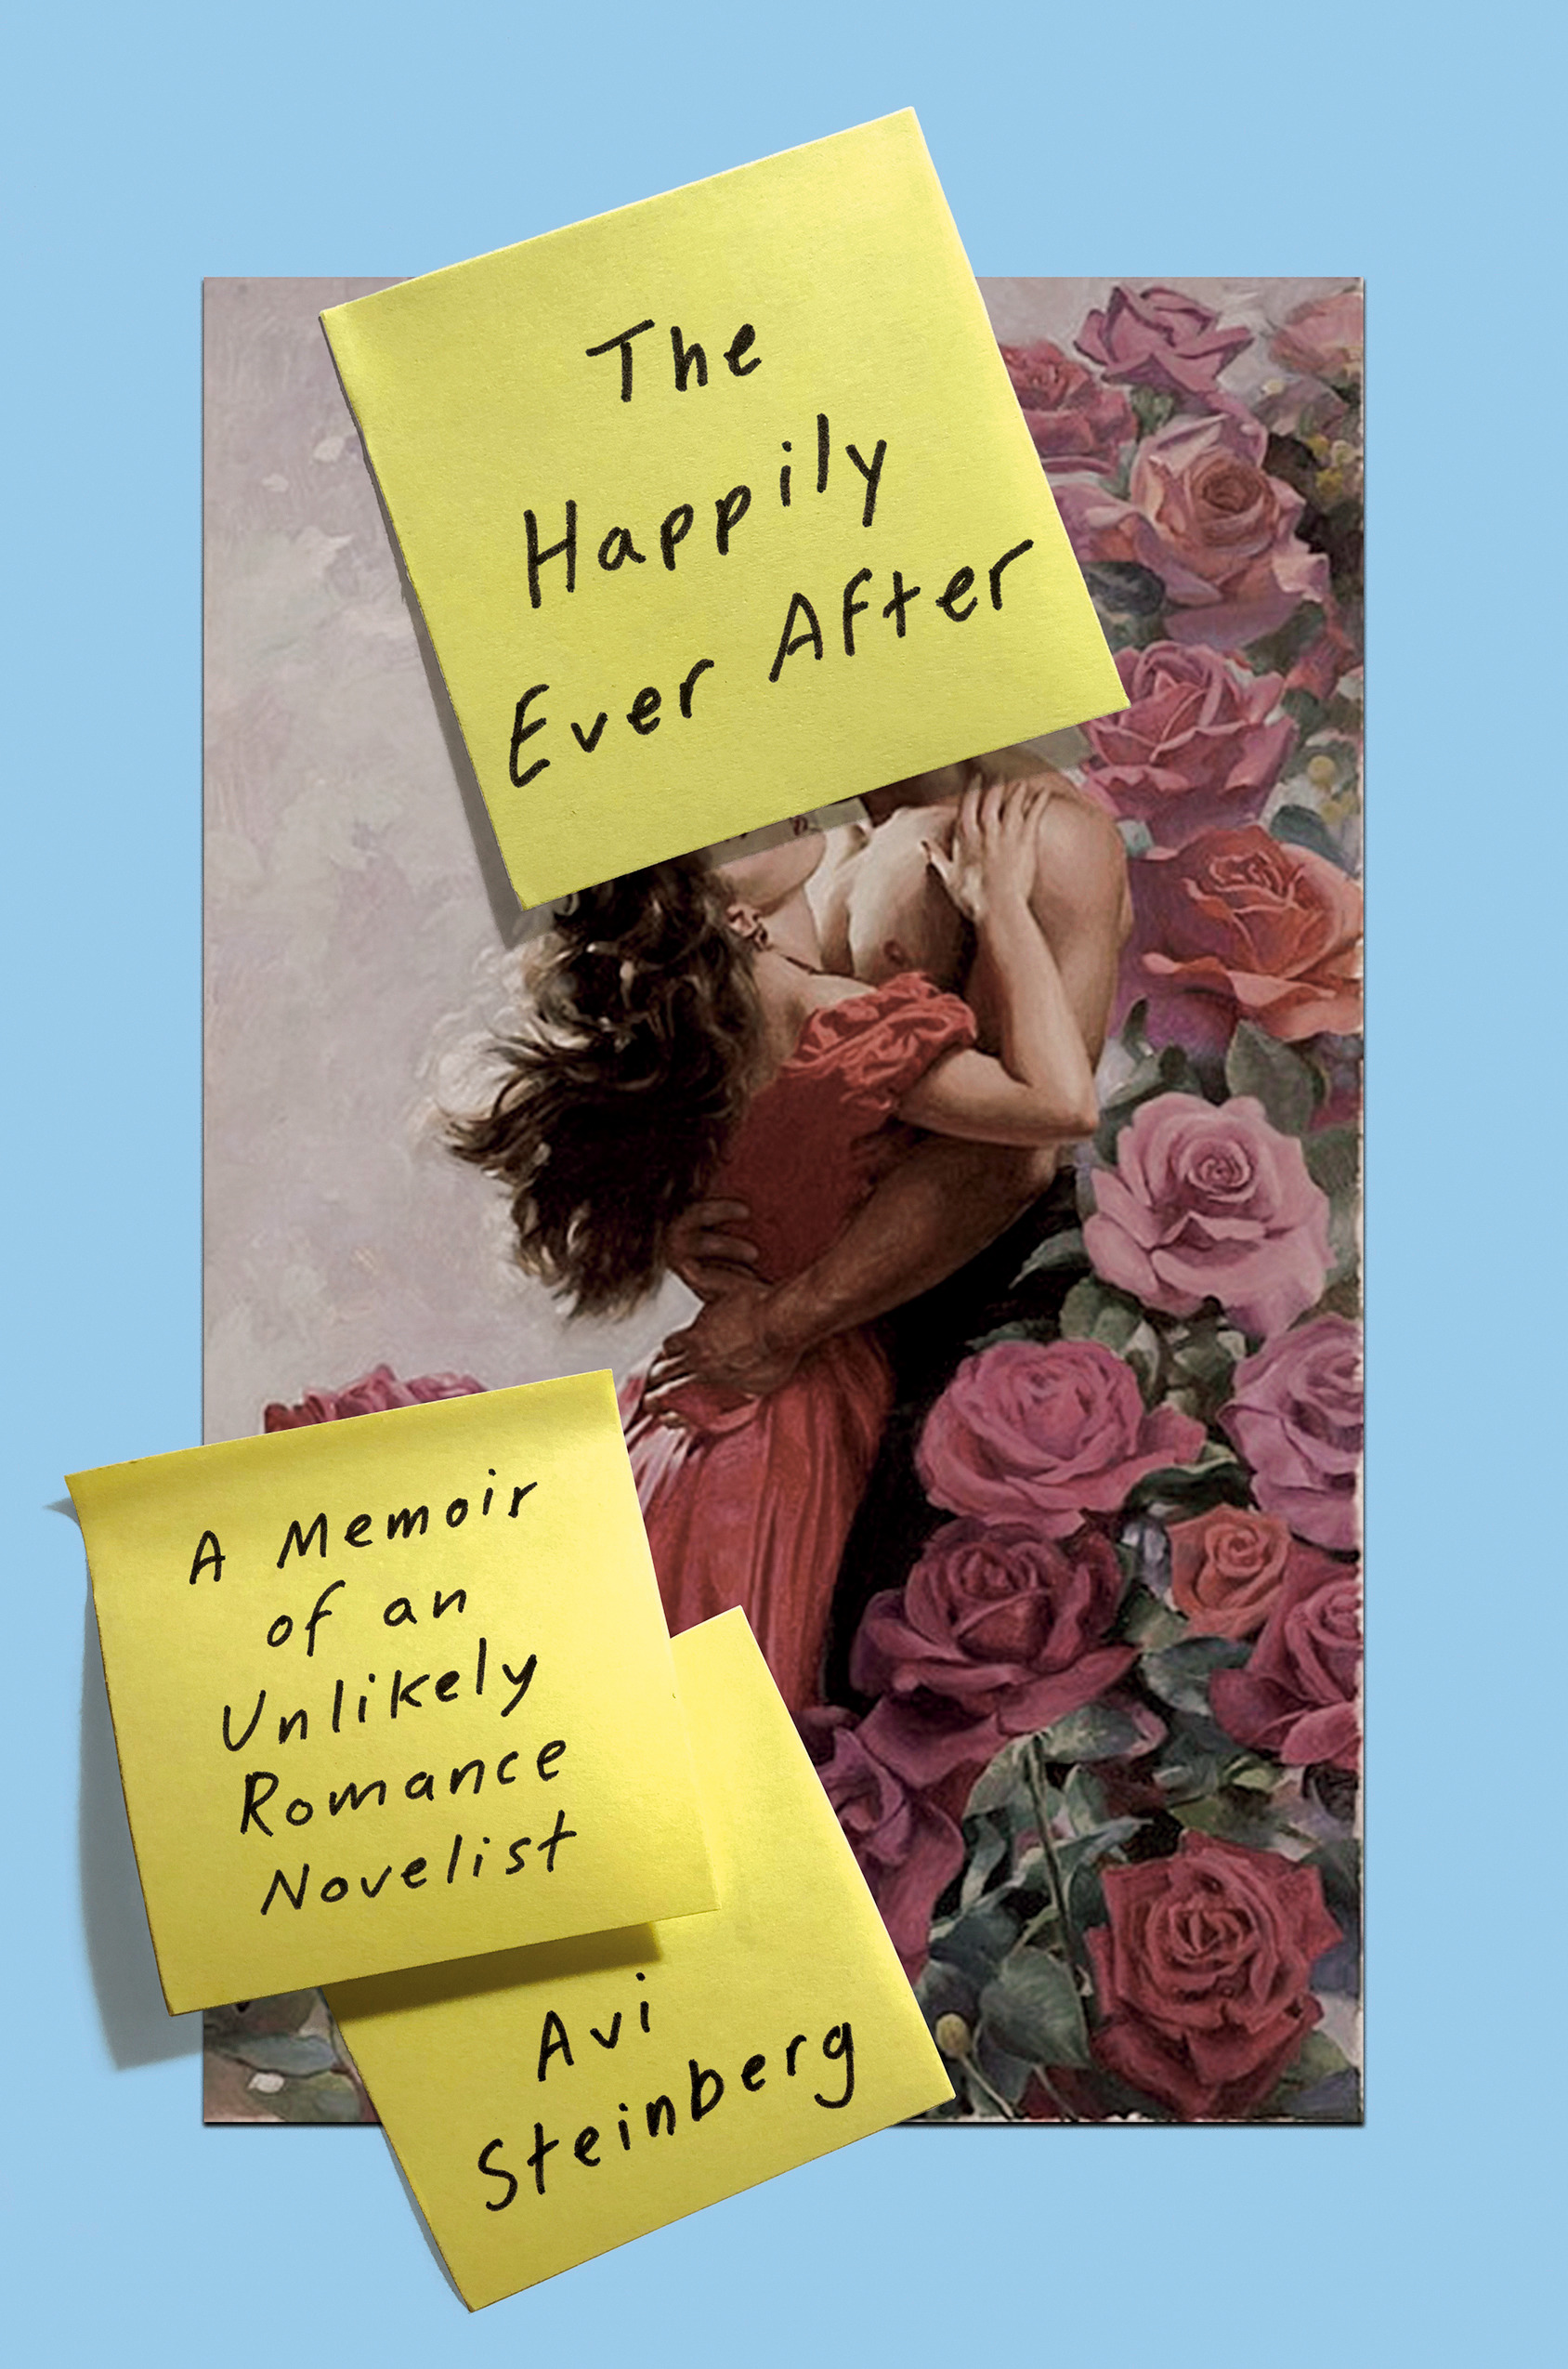 cover image The Happily Ever After: A Memoir of an Unlikely Romance Novelist